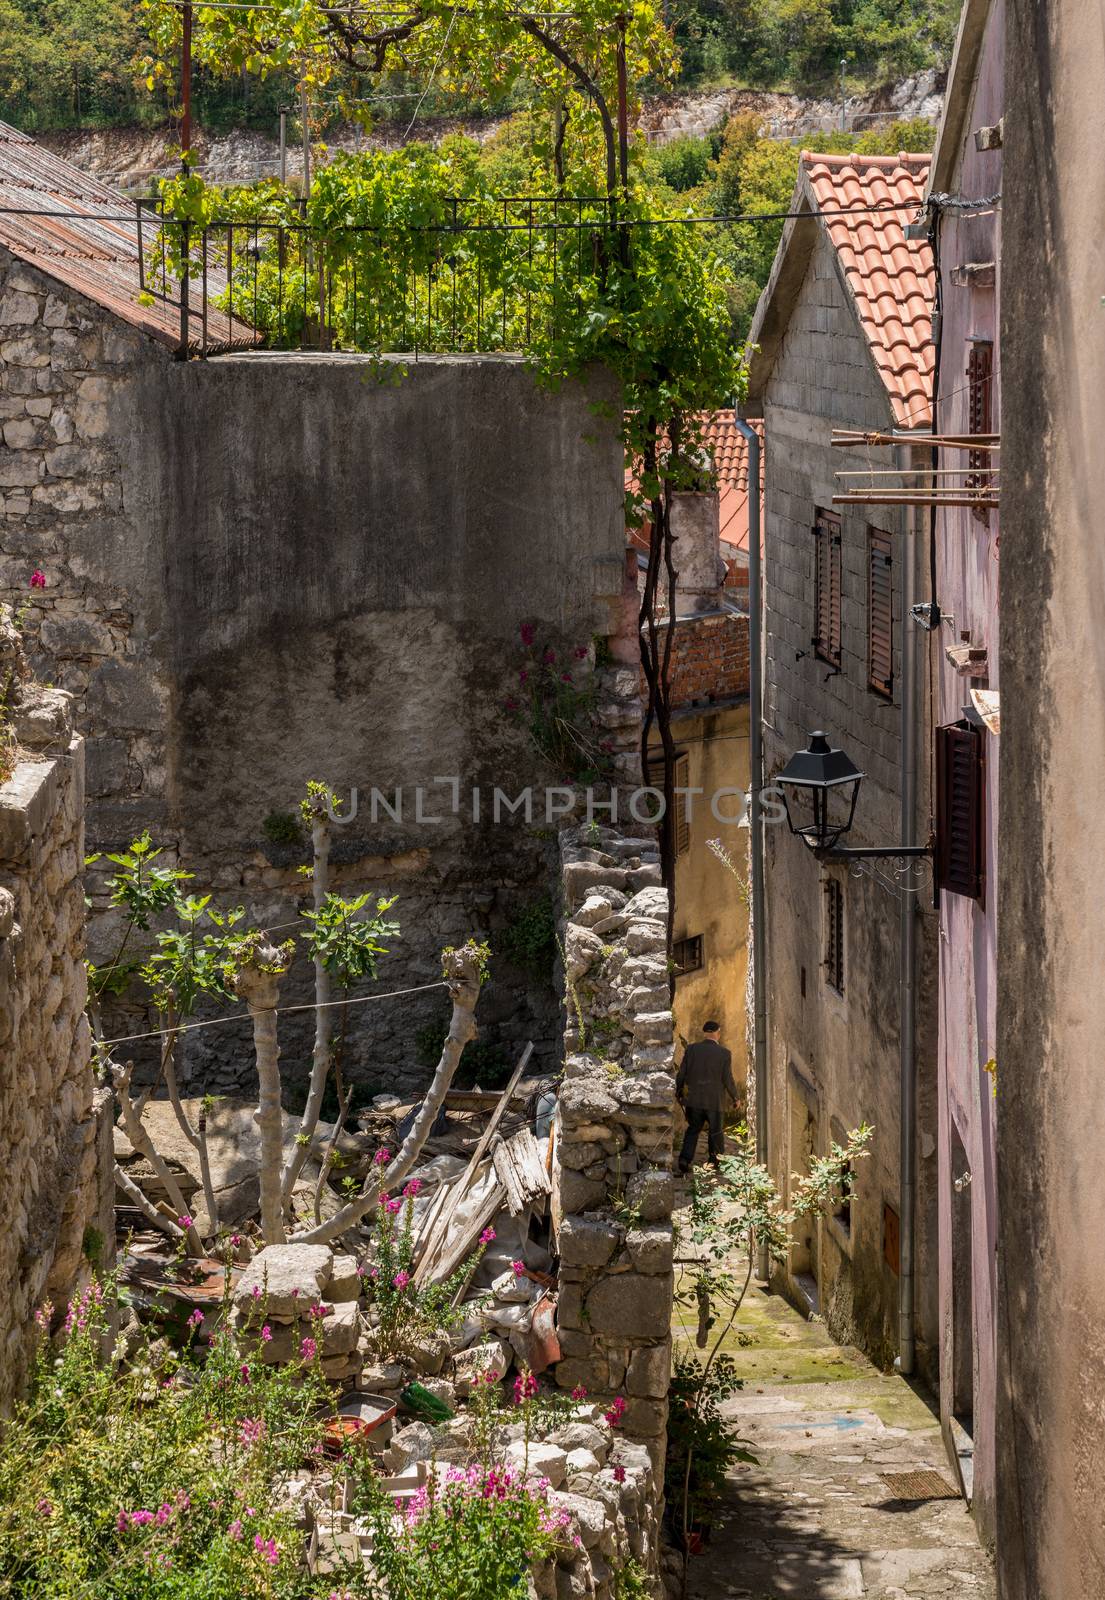 Rustic homes in Croatian town of Novigrad in Istria County by steheap